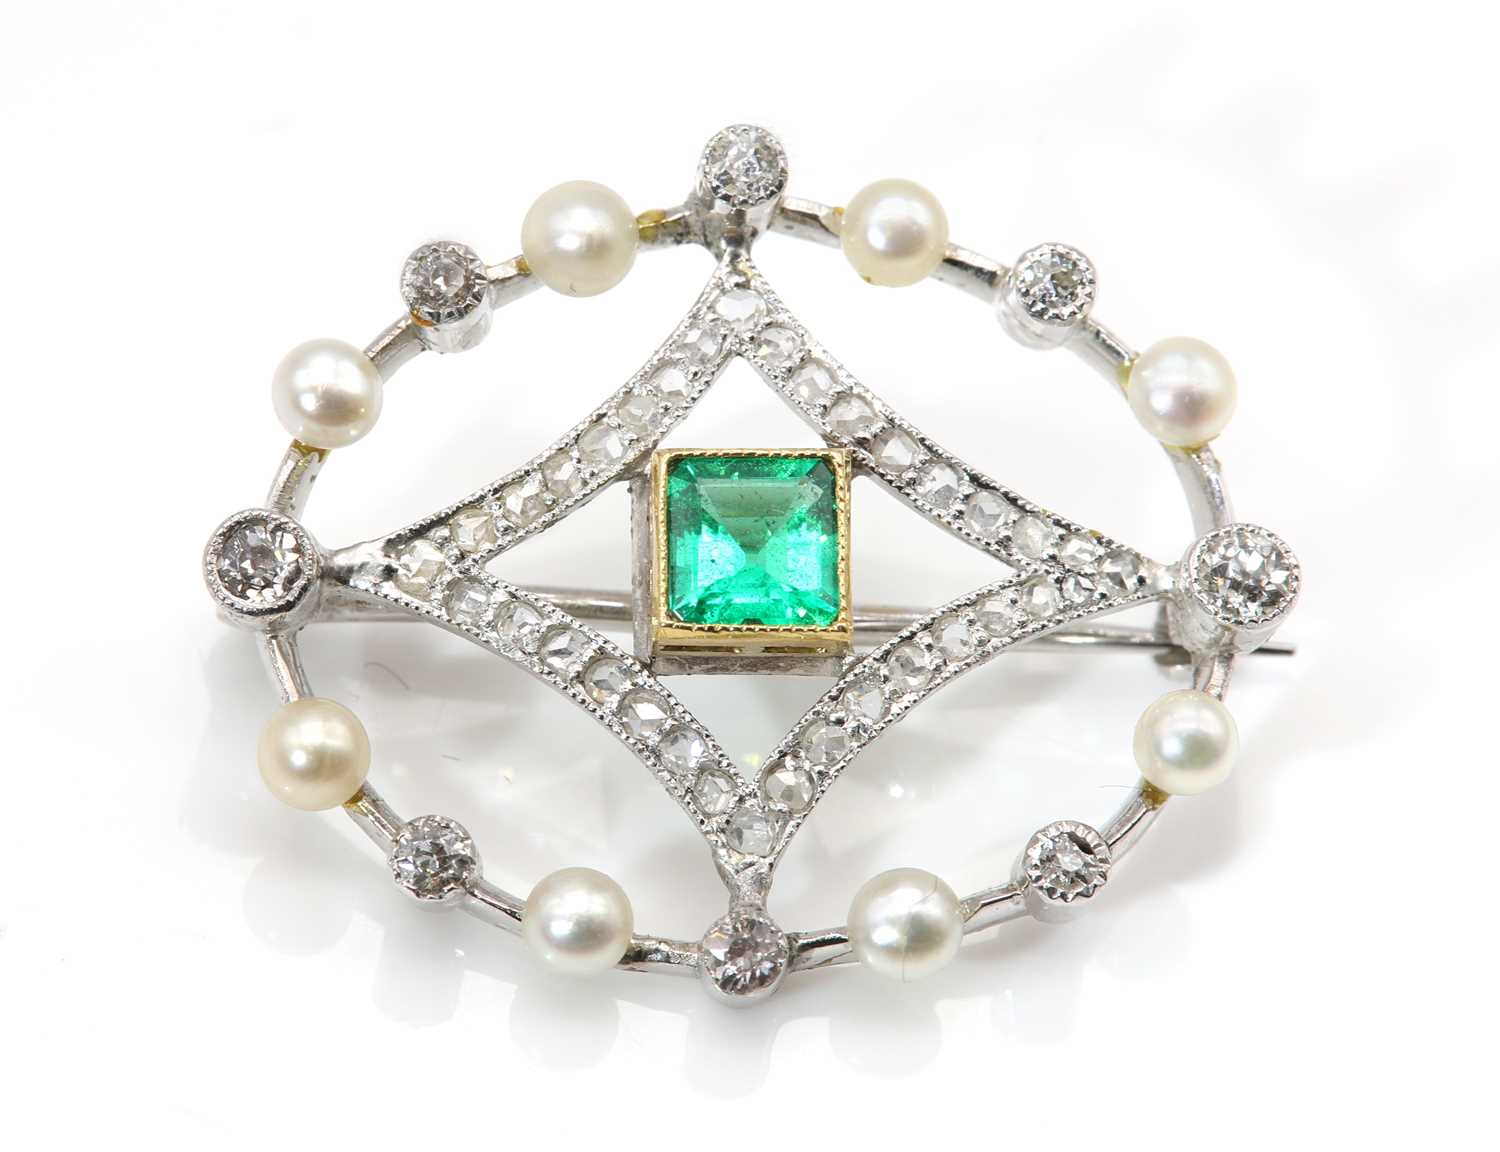 Lot 168 - A two colour gold emerald, seed pearl and diamond brooch, c.1915-1925